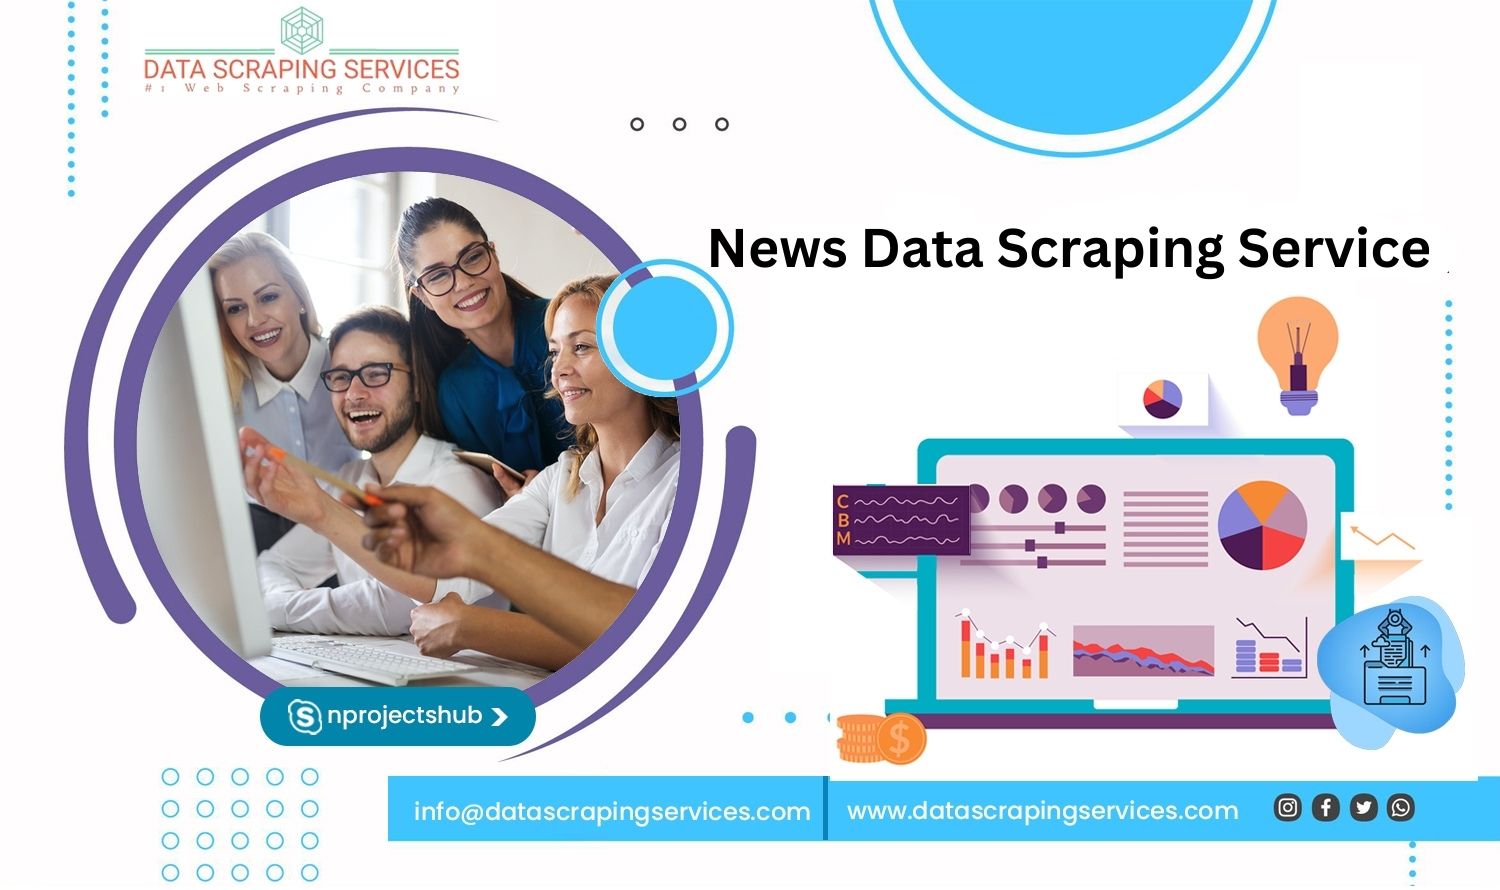 News Data Scraping Services